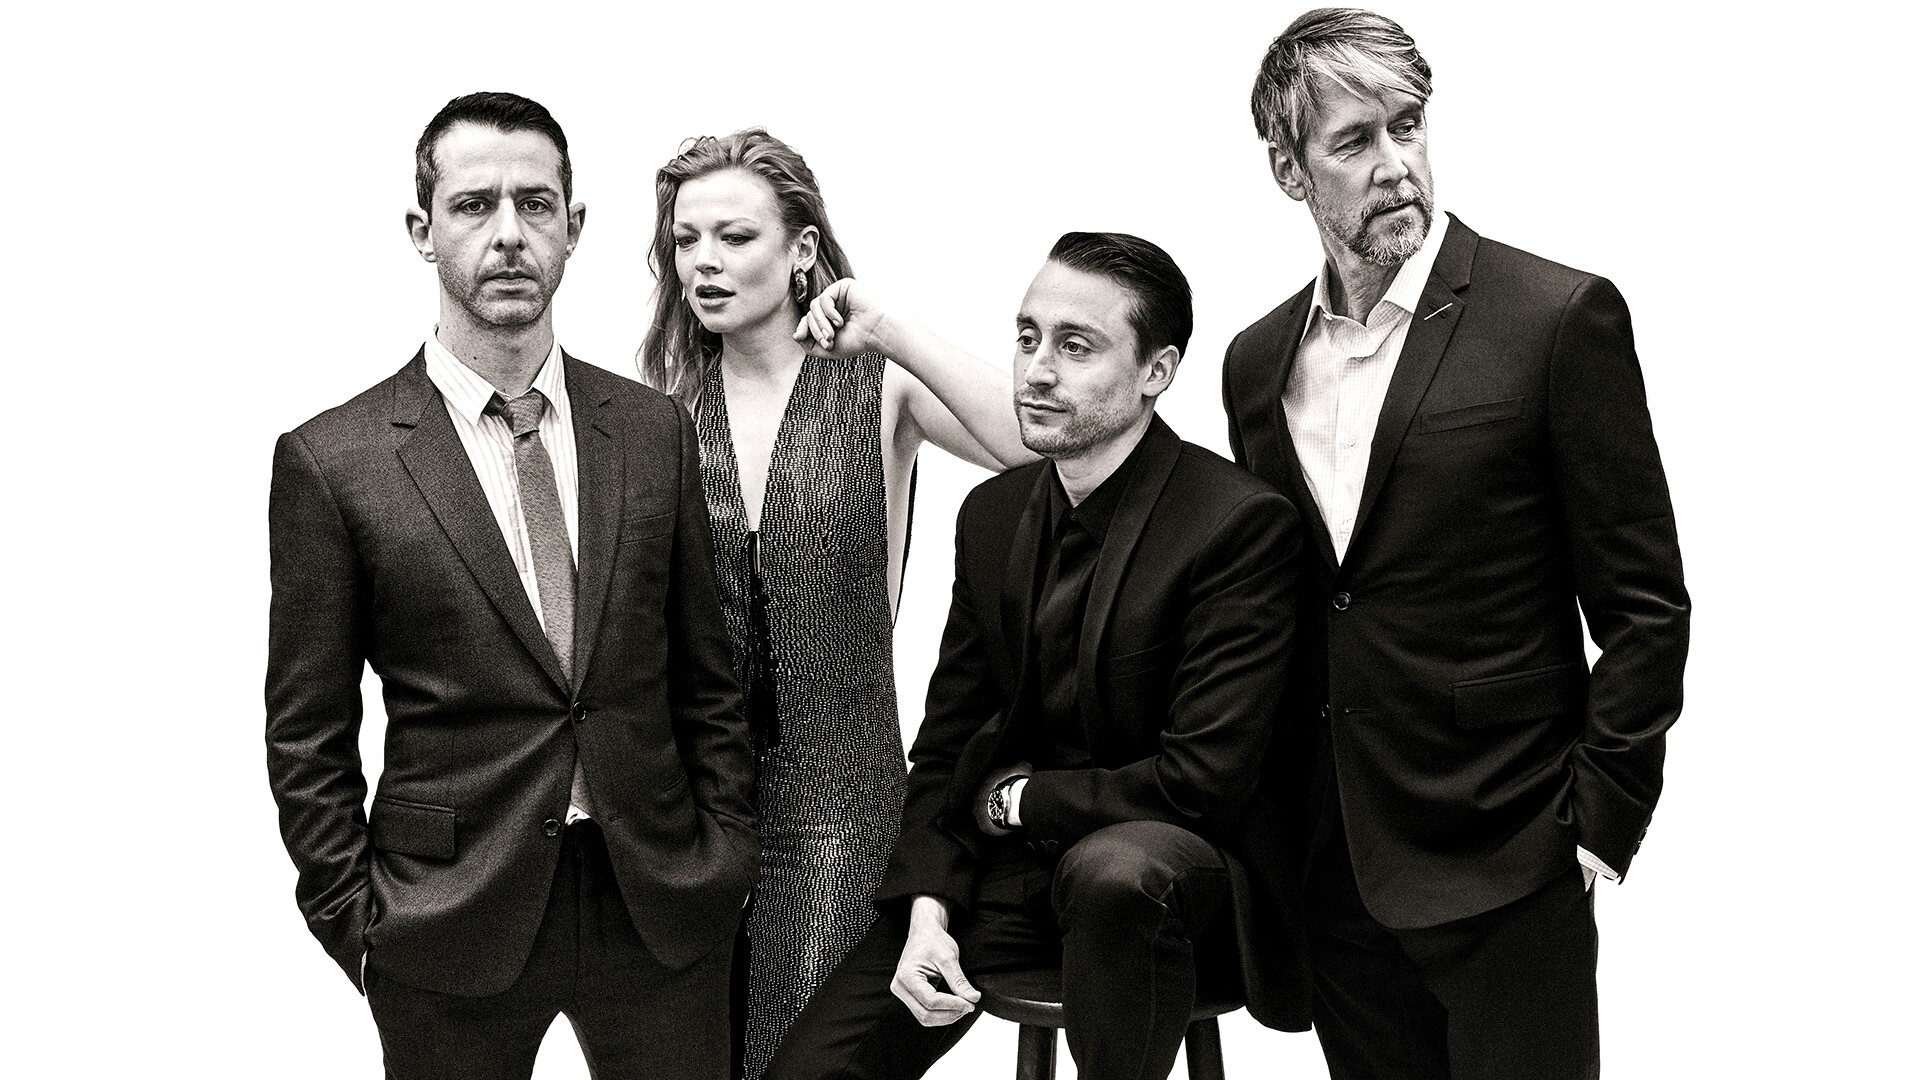 Succession (TV Series): Alan Ruck as Connor, Jeremy Strong as Kendall, Kieran Culkin as Roman, and Sarah Snook as Siobhan. 1920x1080 Full HD Background.